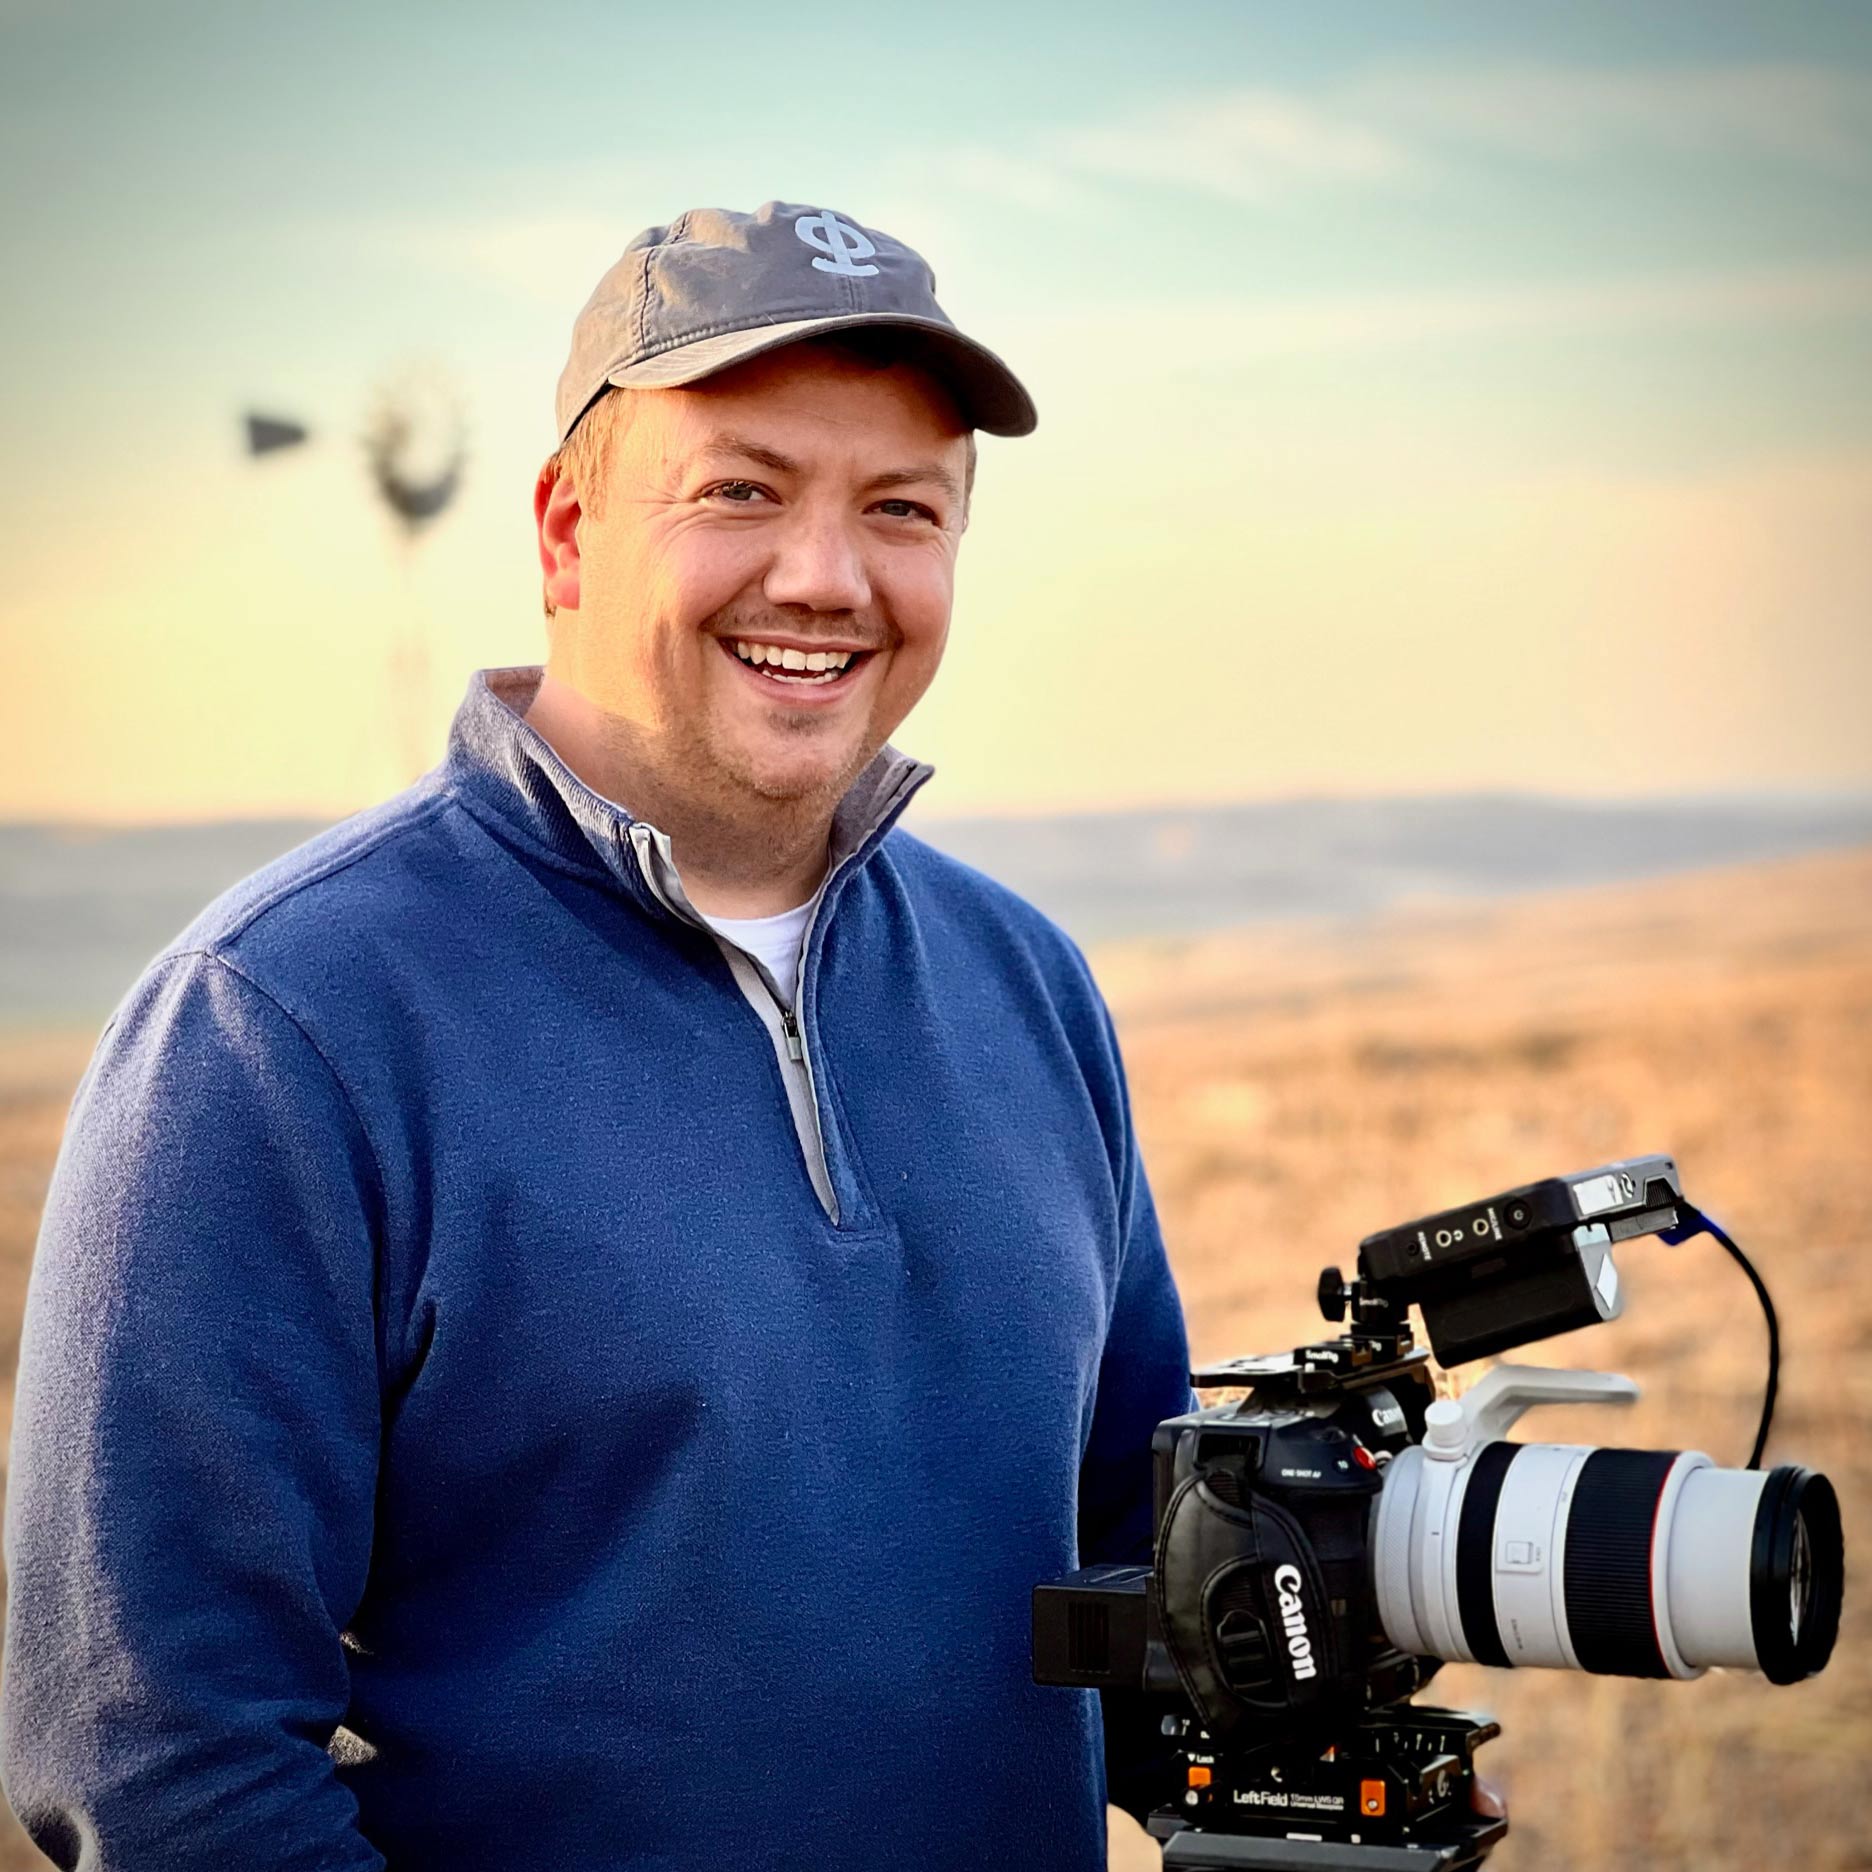 Headshot of Parable Pictures team member Will Brooks smiling, wearing a ball cap and standing with his Canon camera in an open field on a set